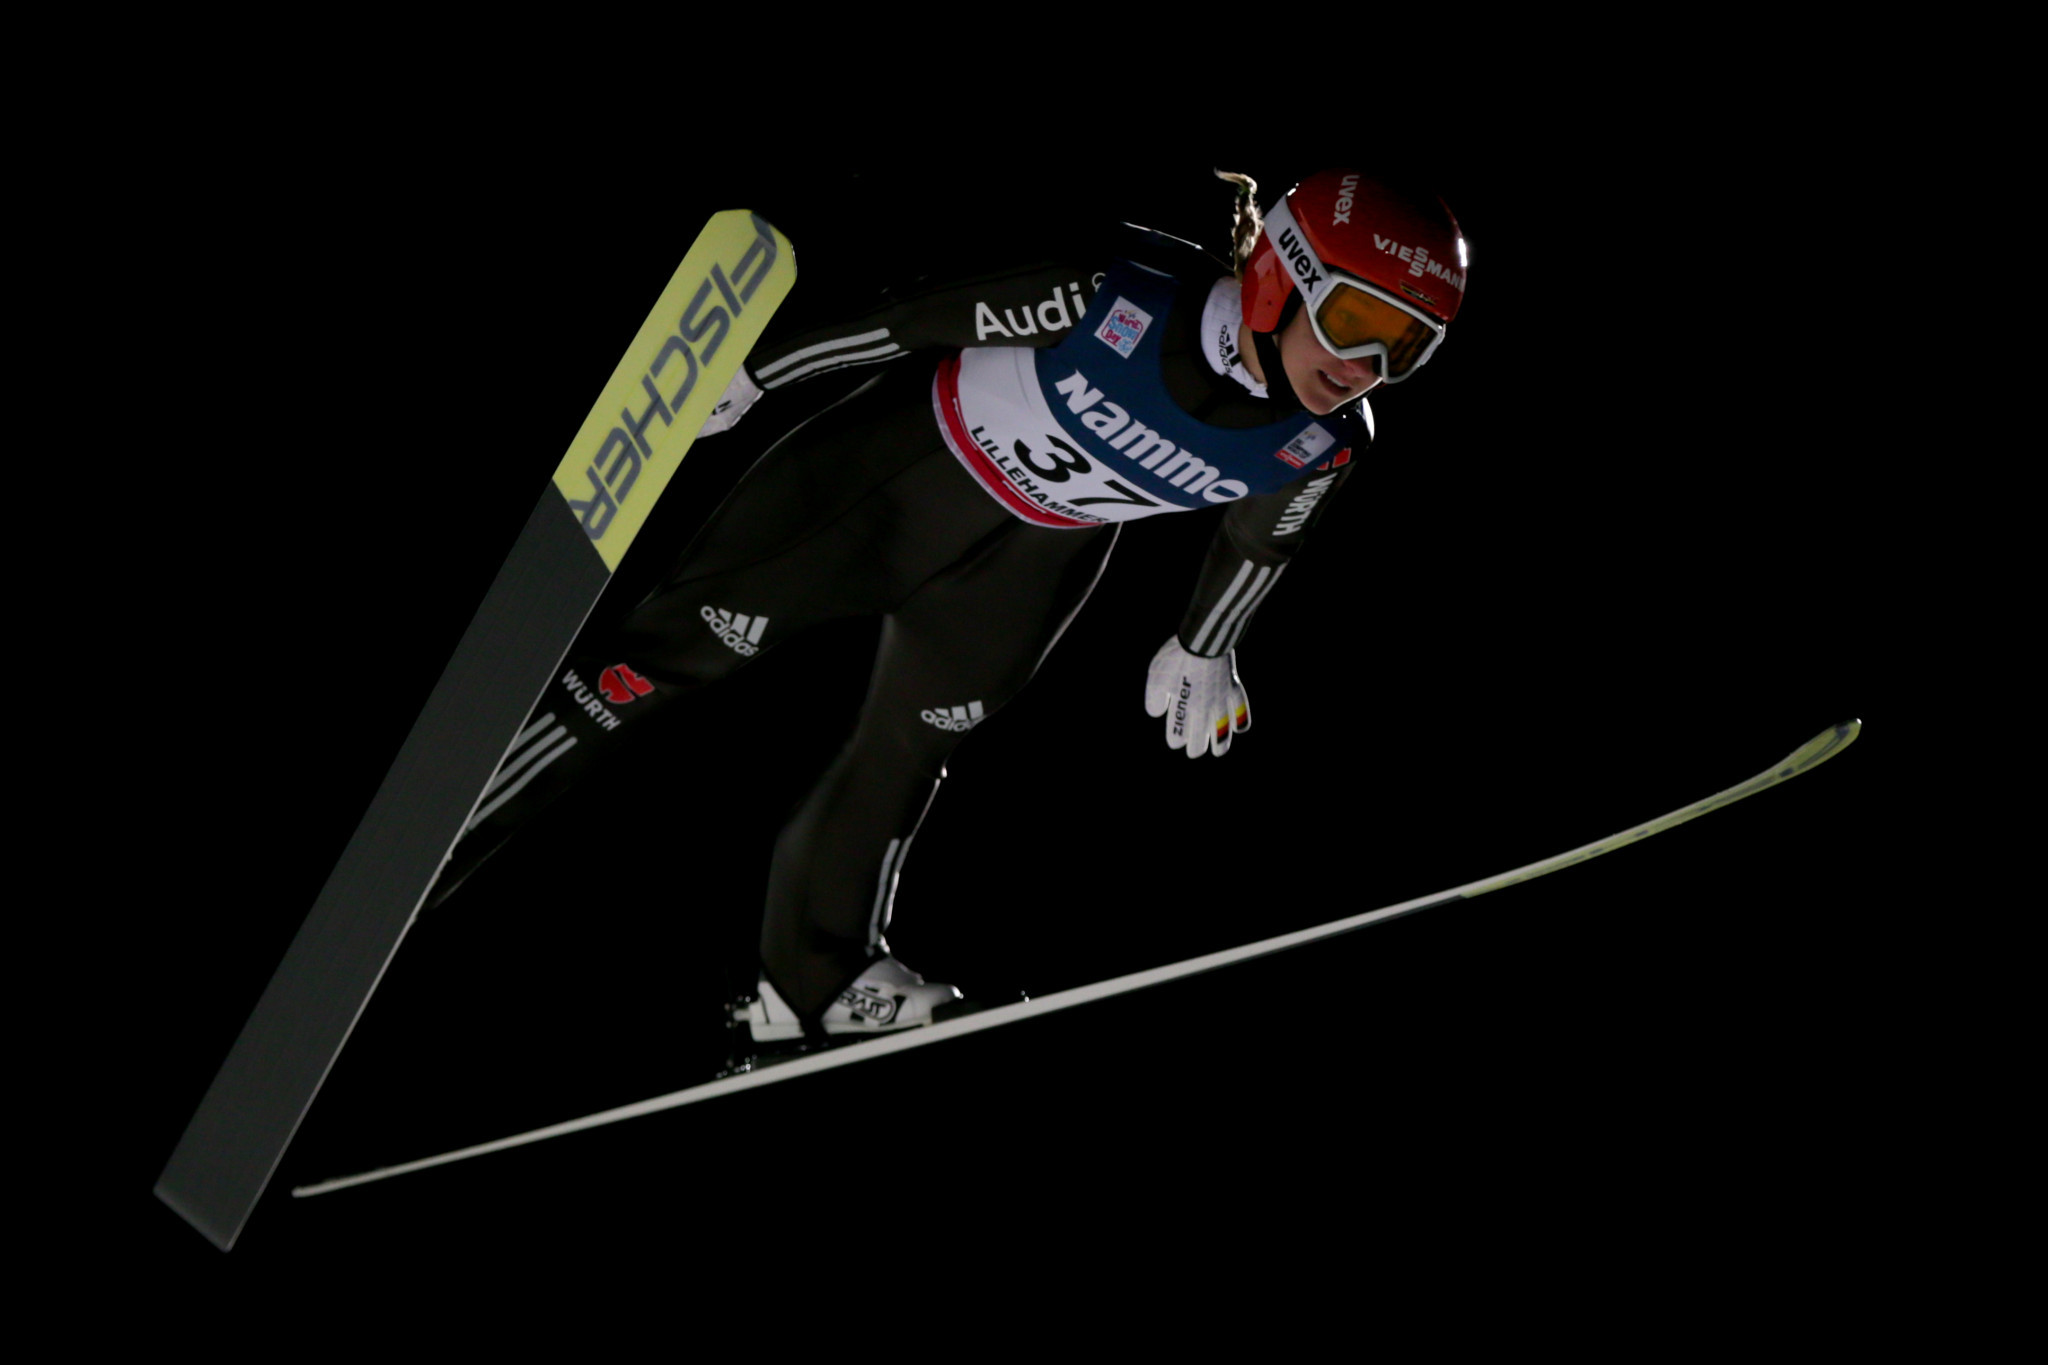 The recent success of German ski jumpers, including Katharina Althaus, has led to a boom in ticket sales ©Getty Images